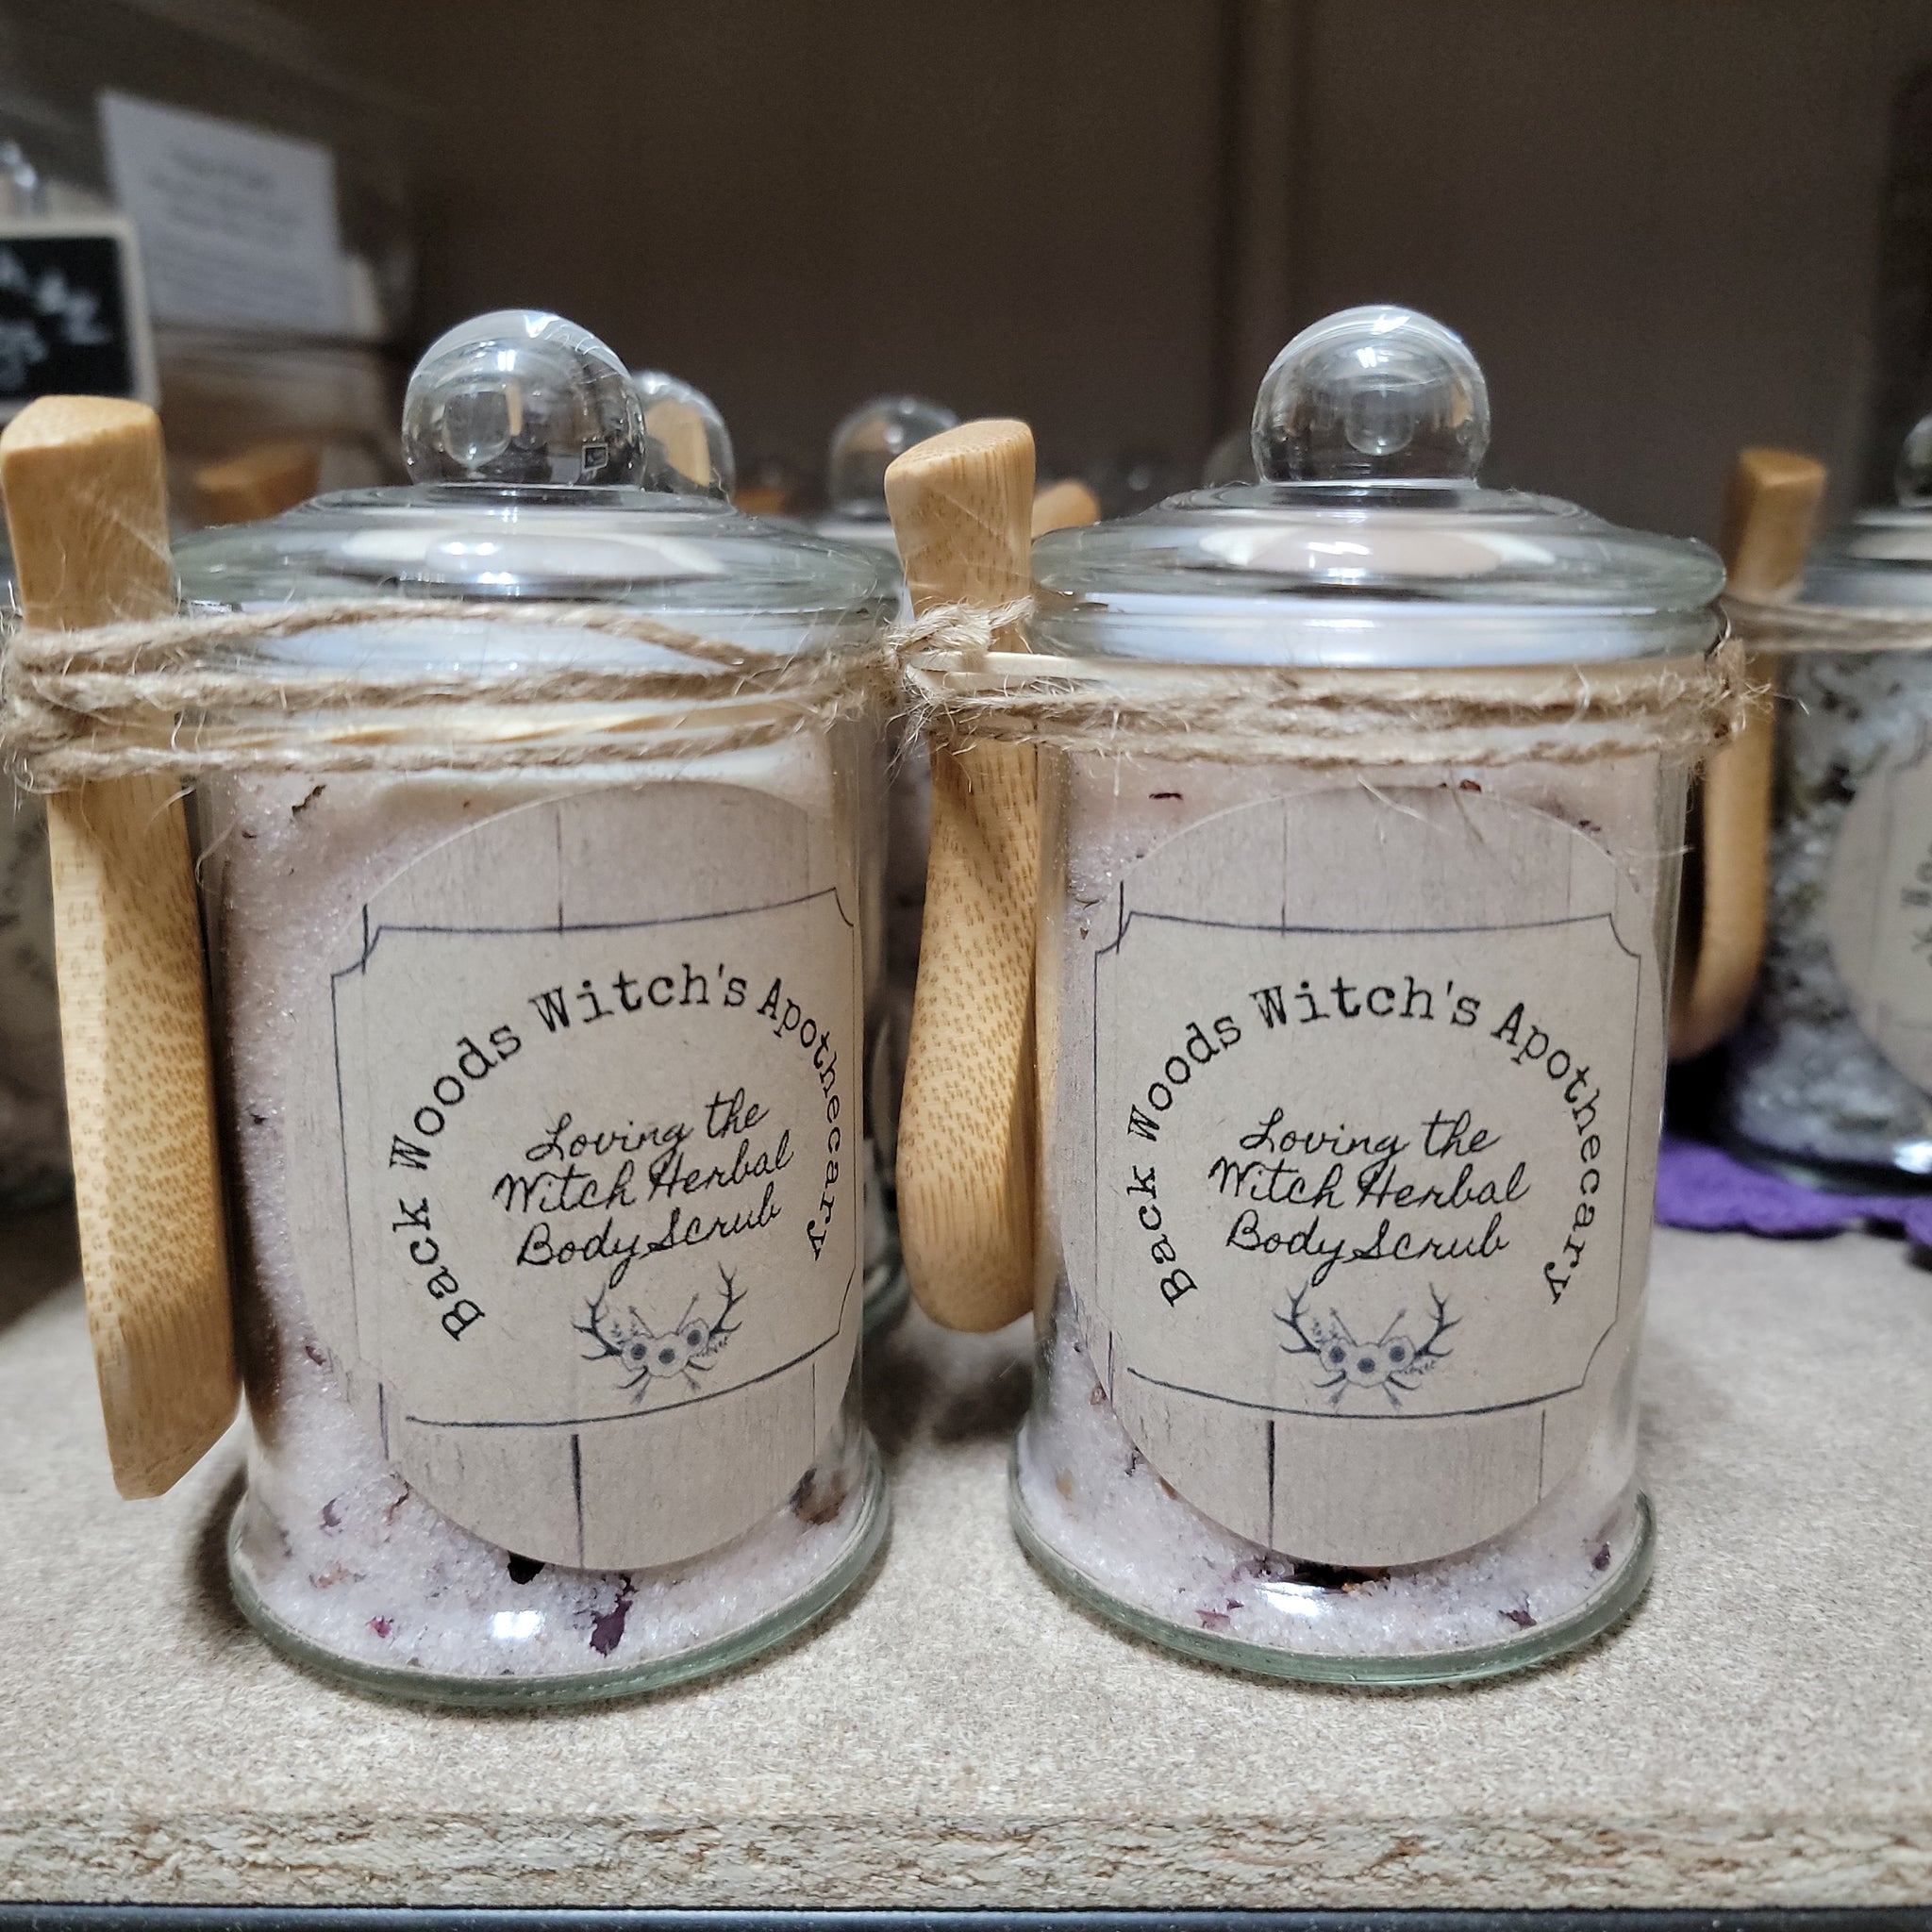 Back Wood Witch’s Apothecary - Loving the Witch Herbal Scrub